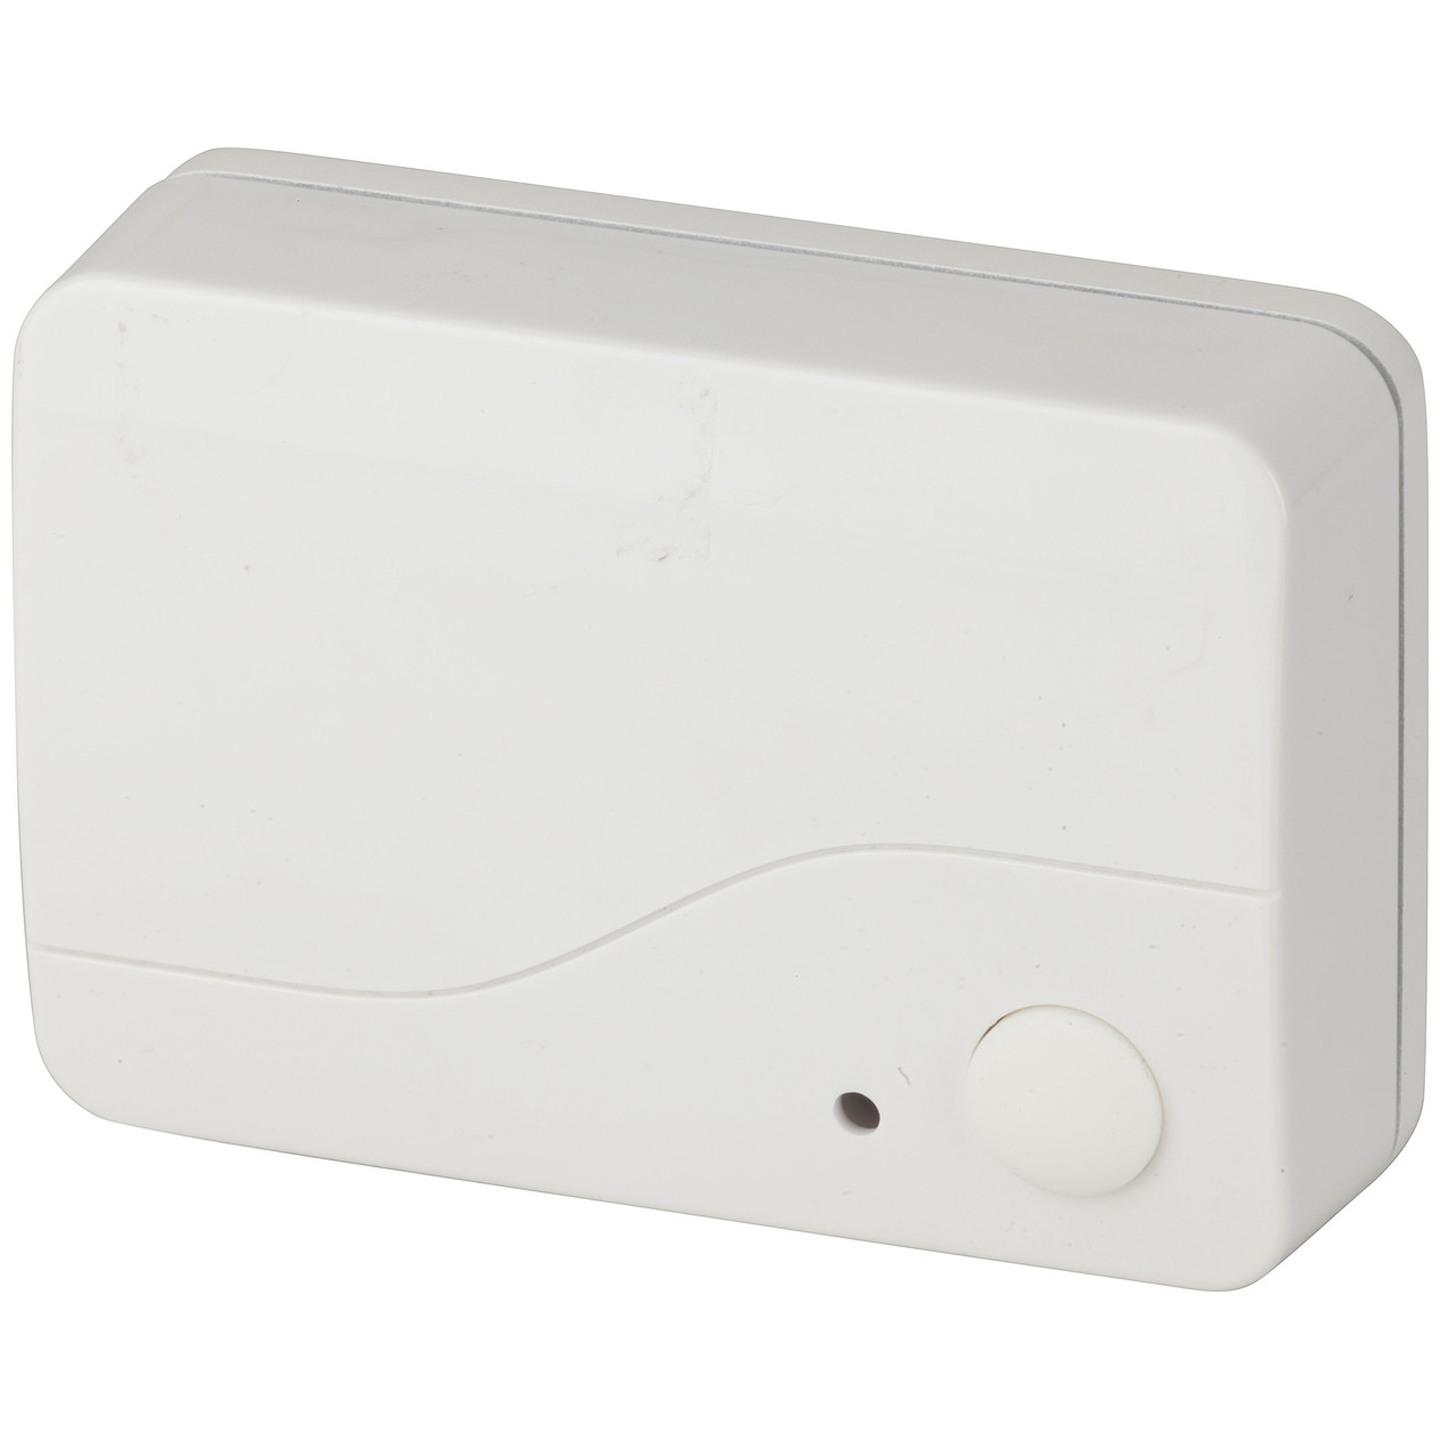 240VAC Wireless Switch Module to Suit Home Automation Systems.